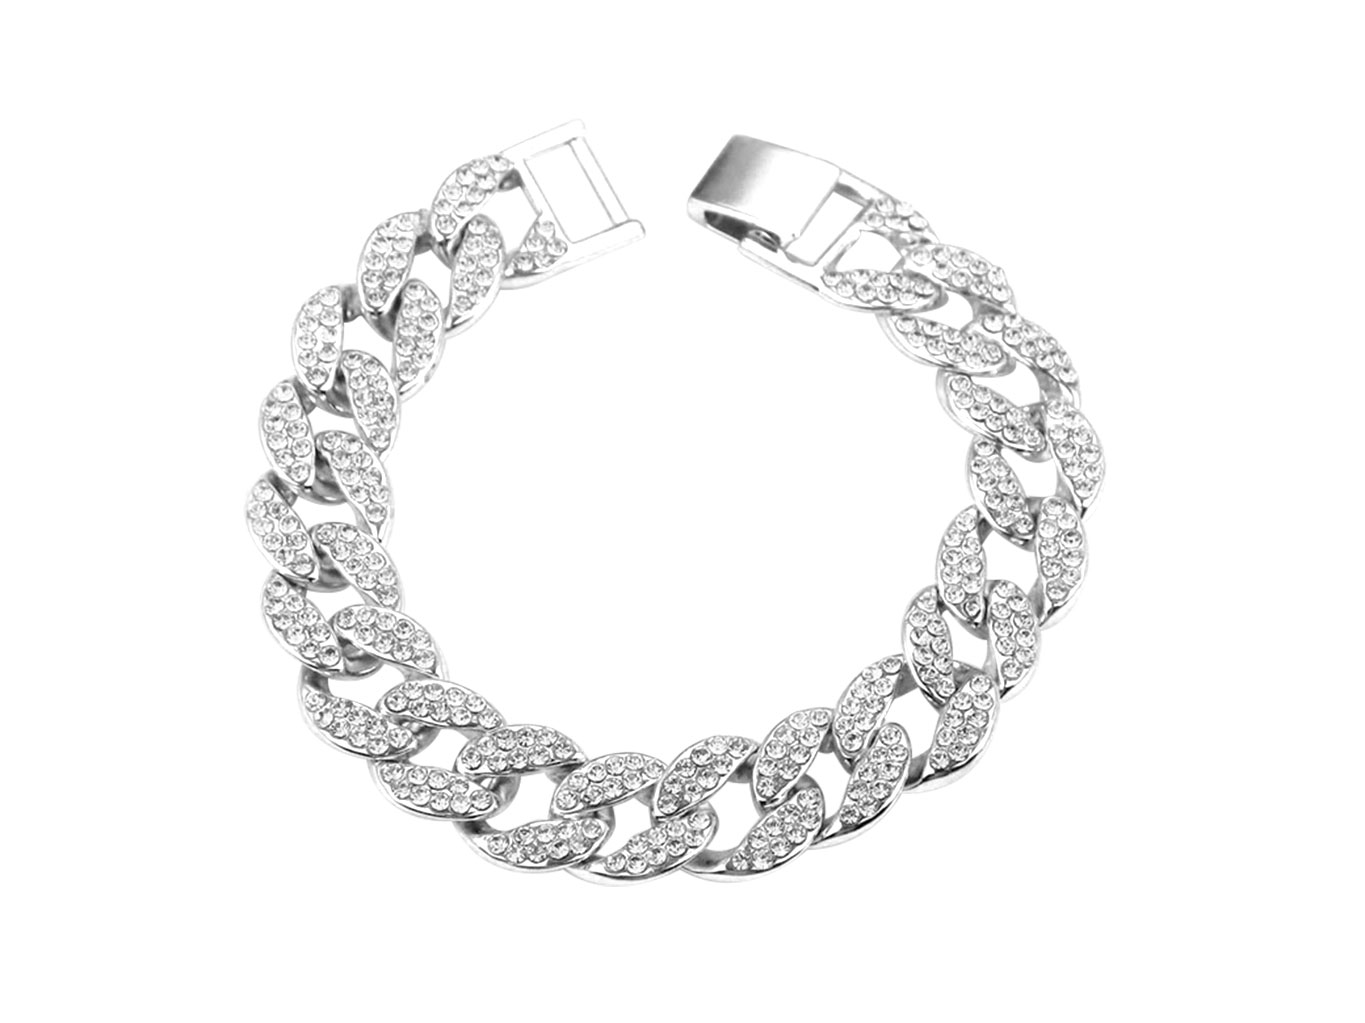 Sparkling Silver Plated Chain Bracelet - Adema